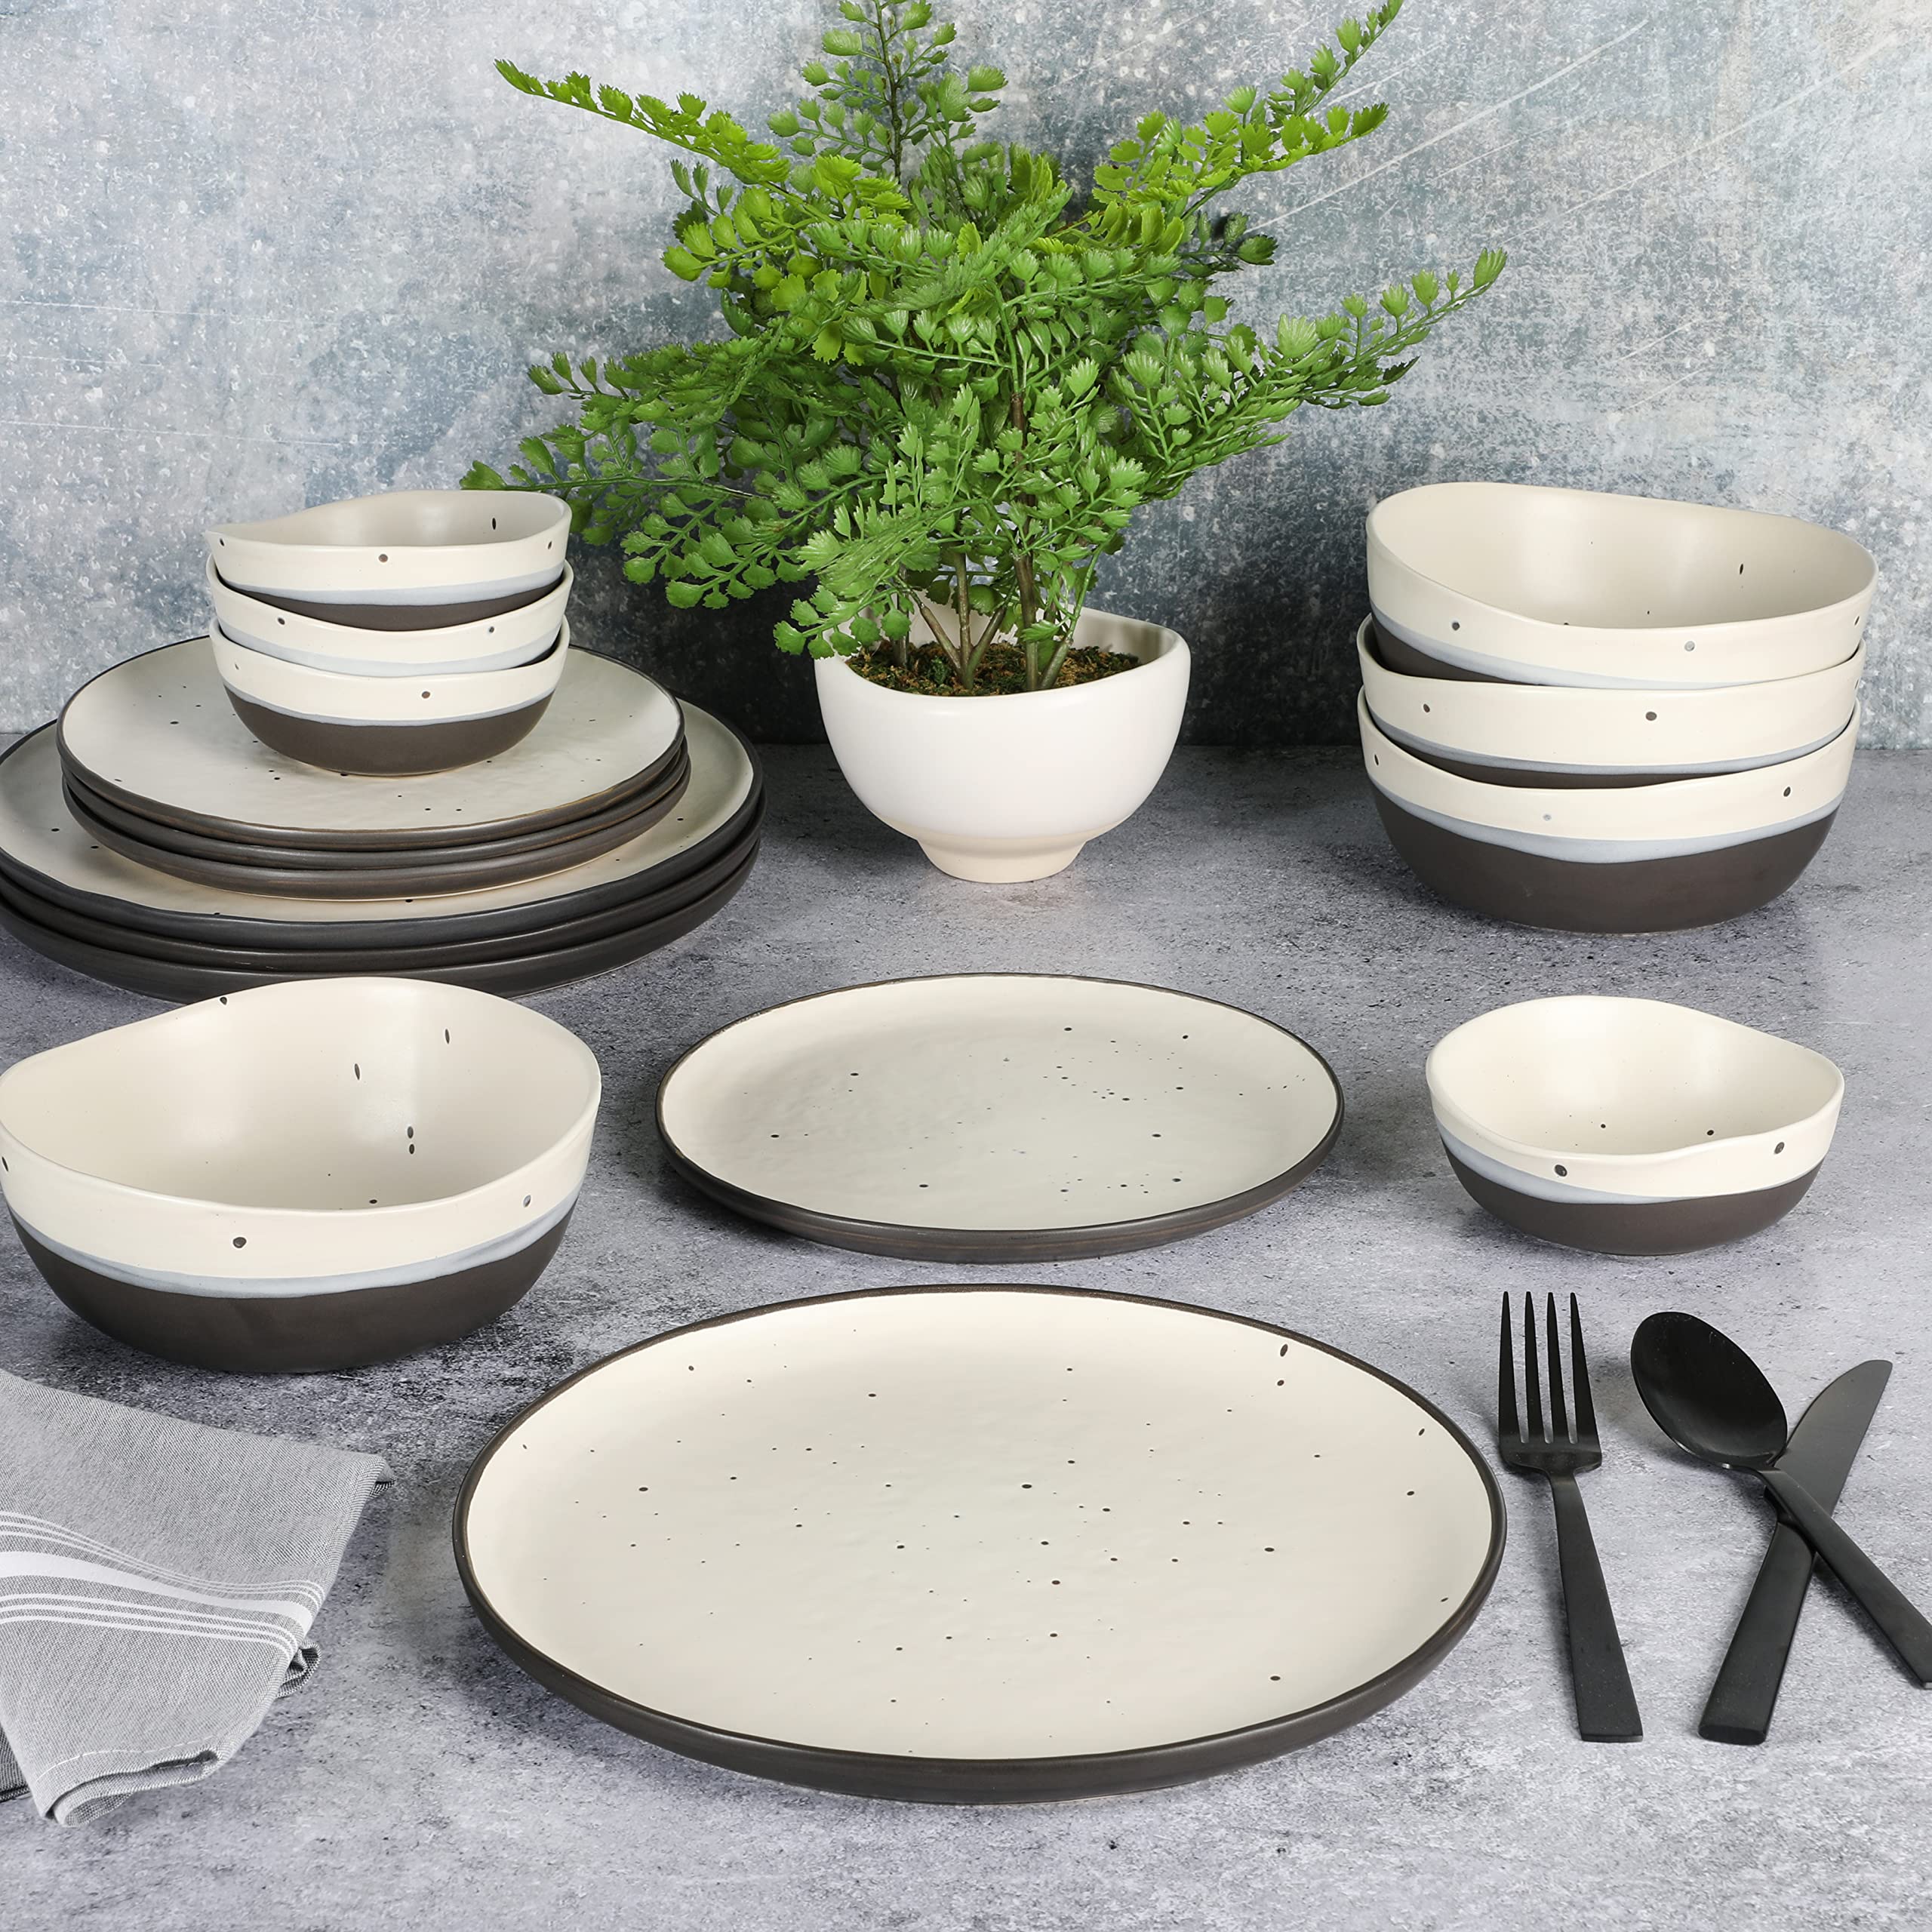 Gibson Elite Rhinebeck Double Bowl Dinnerware Set, Service for 4 (16pcs), White and Black